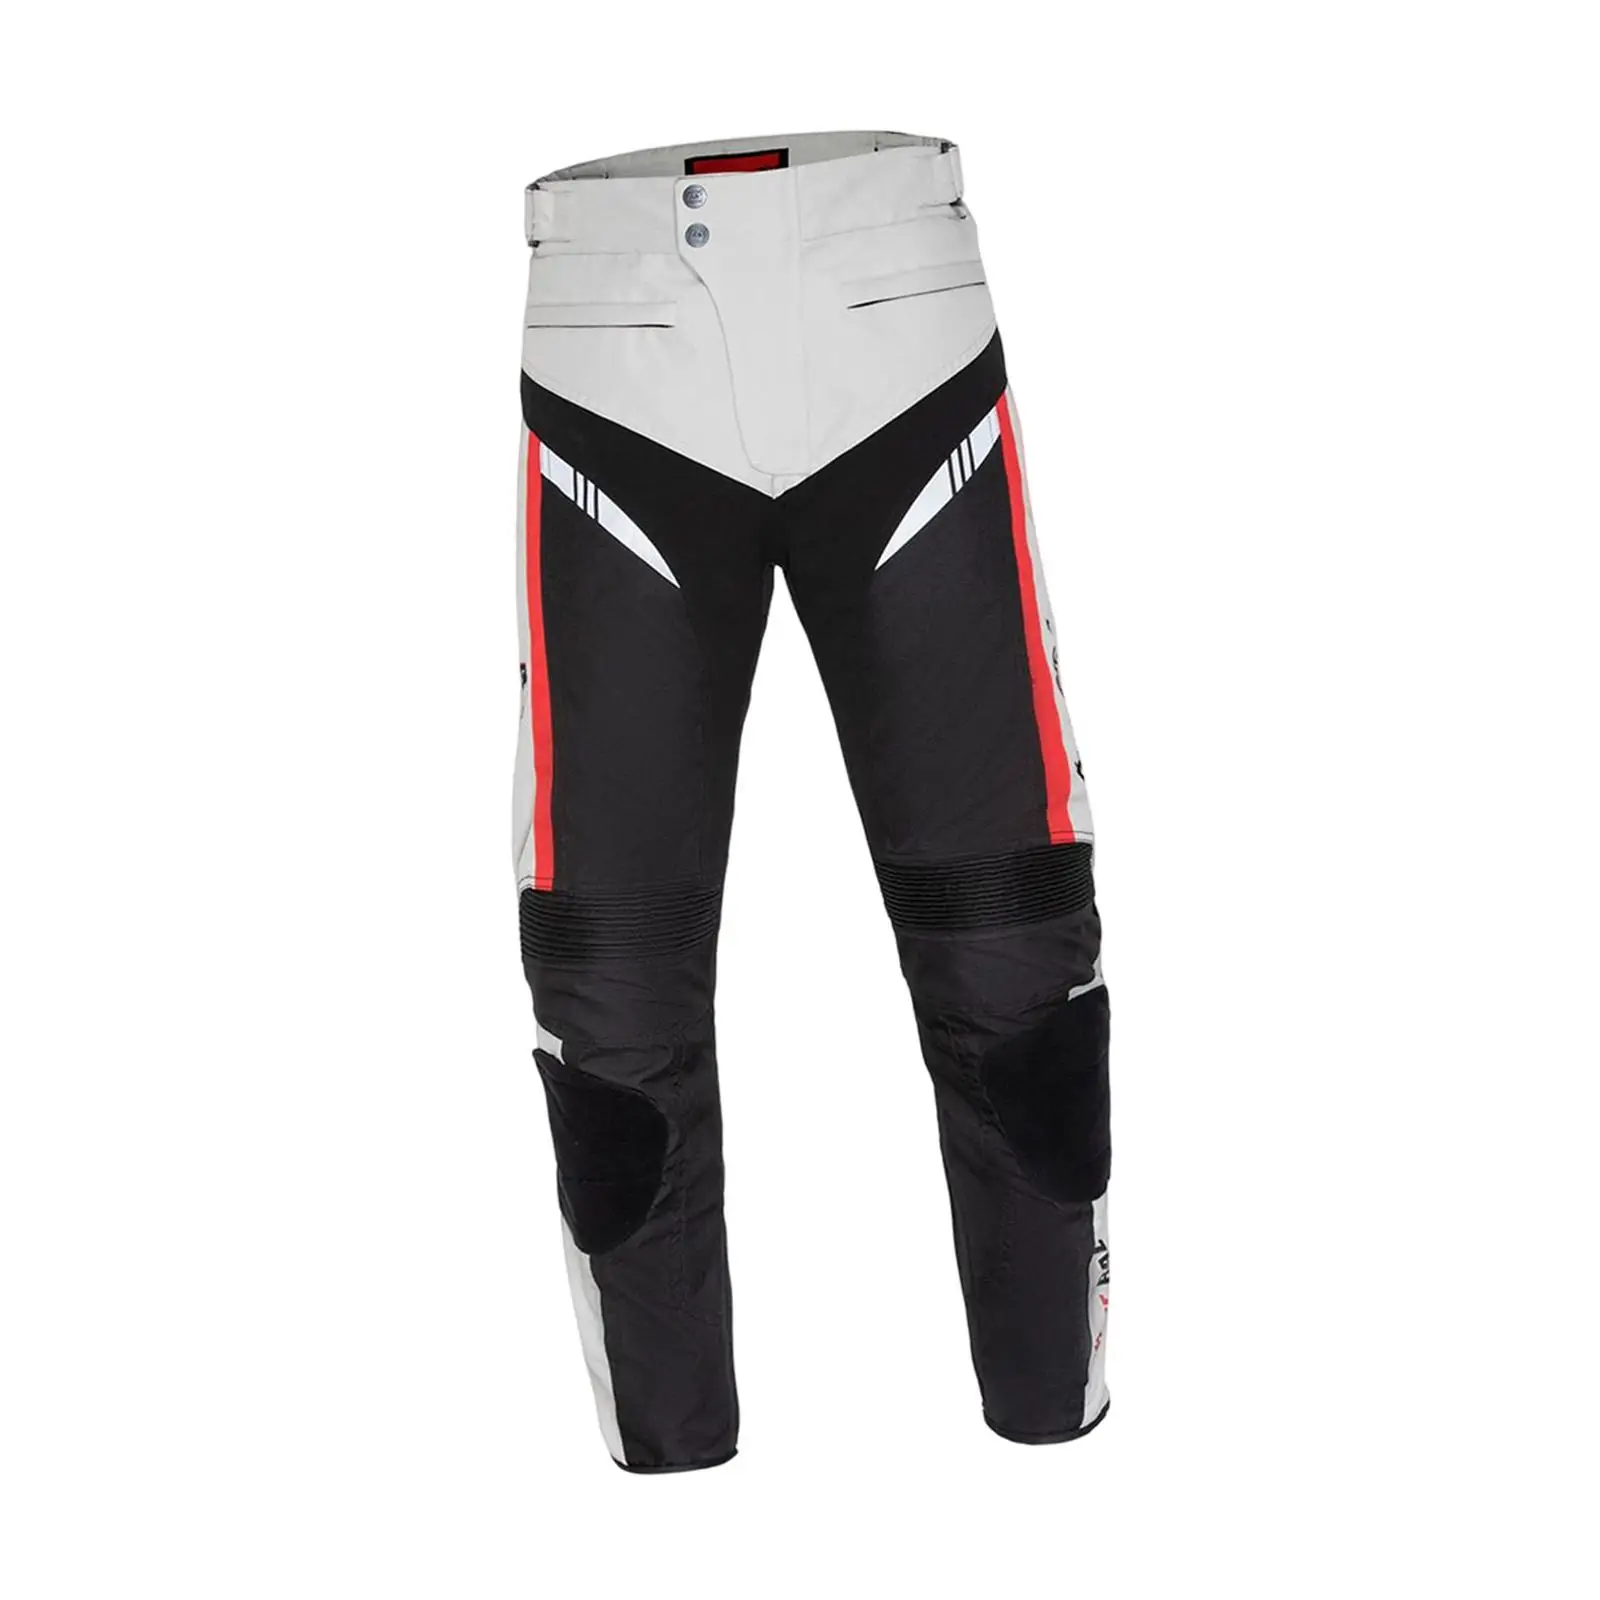 Motorcycle Pants Warm Wear with Reflective Strip Racing Overpants for Motorbike Riding Motocross Dirt Bike Cycling